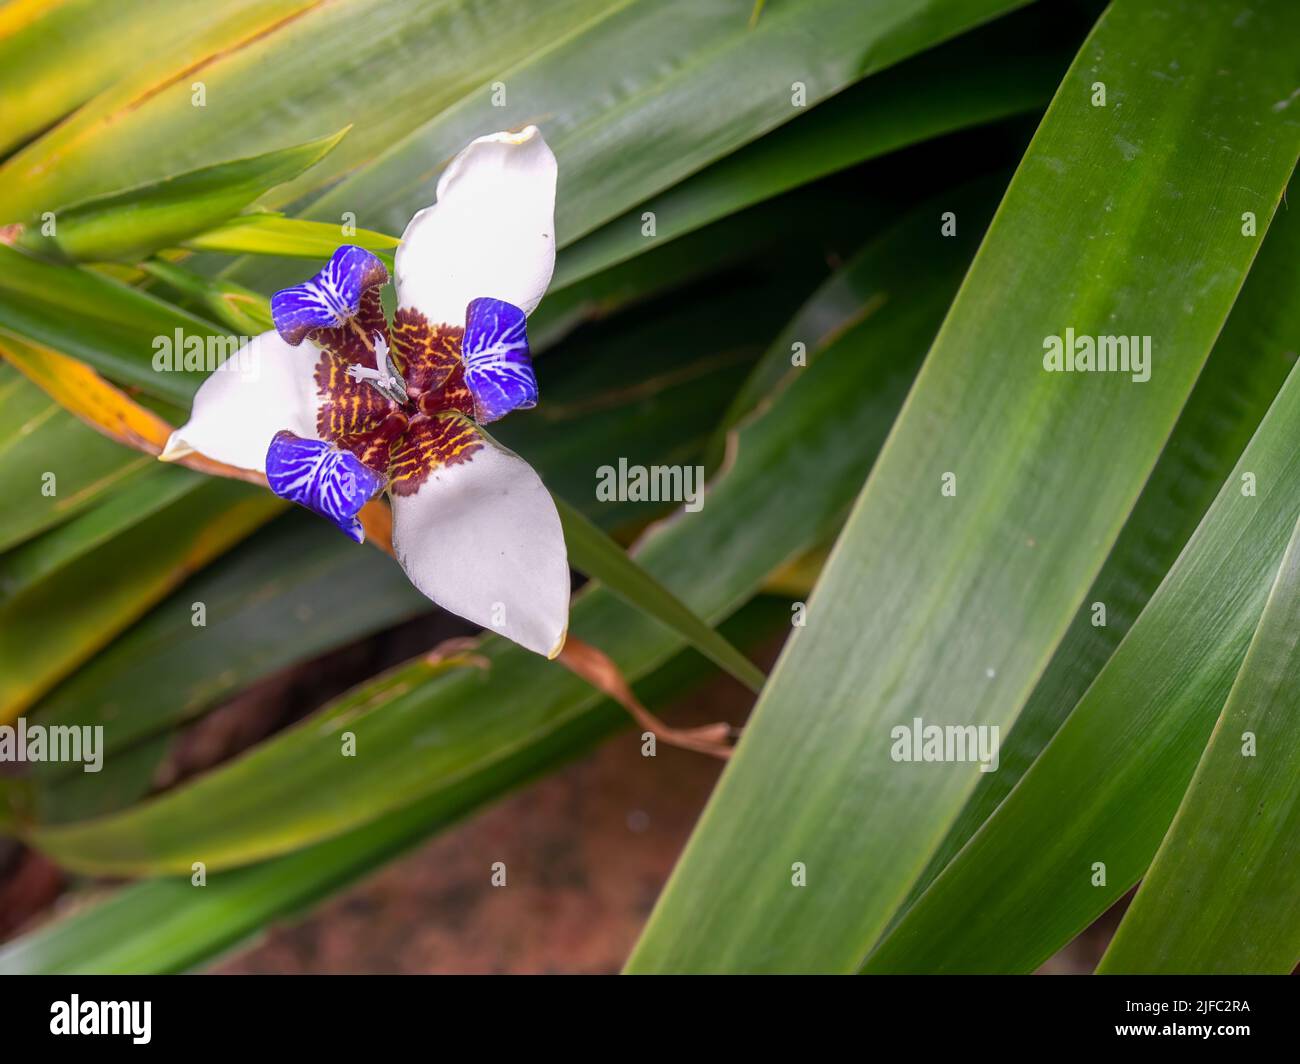 An exotic walking iris flower blooming amongst the leaves of the plant, captured at a garden near the colonial town of Villa de Leyva in central Colom Stock Photo